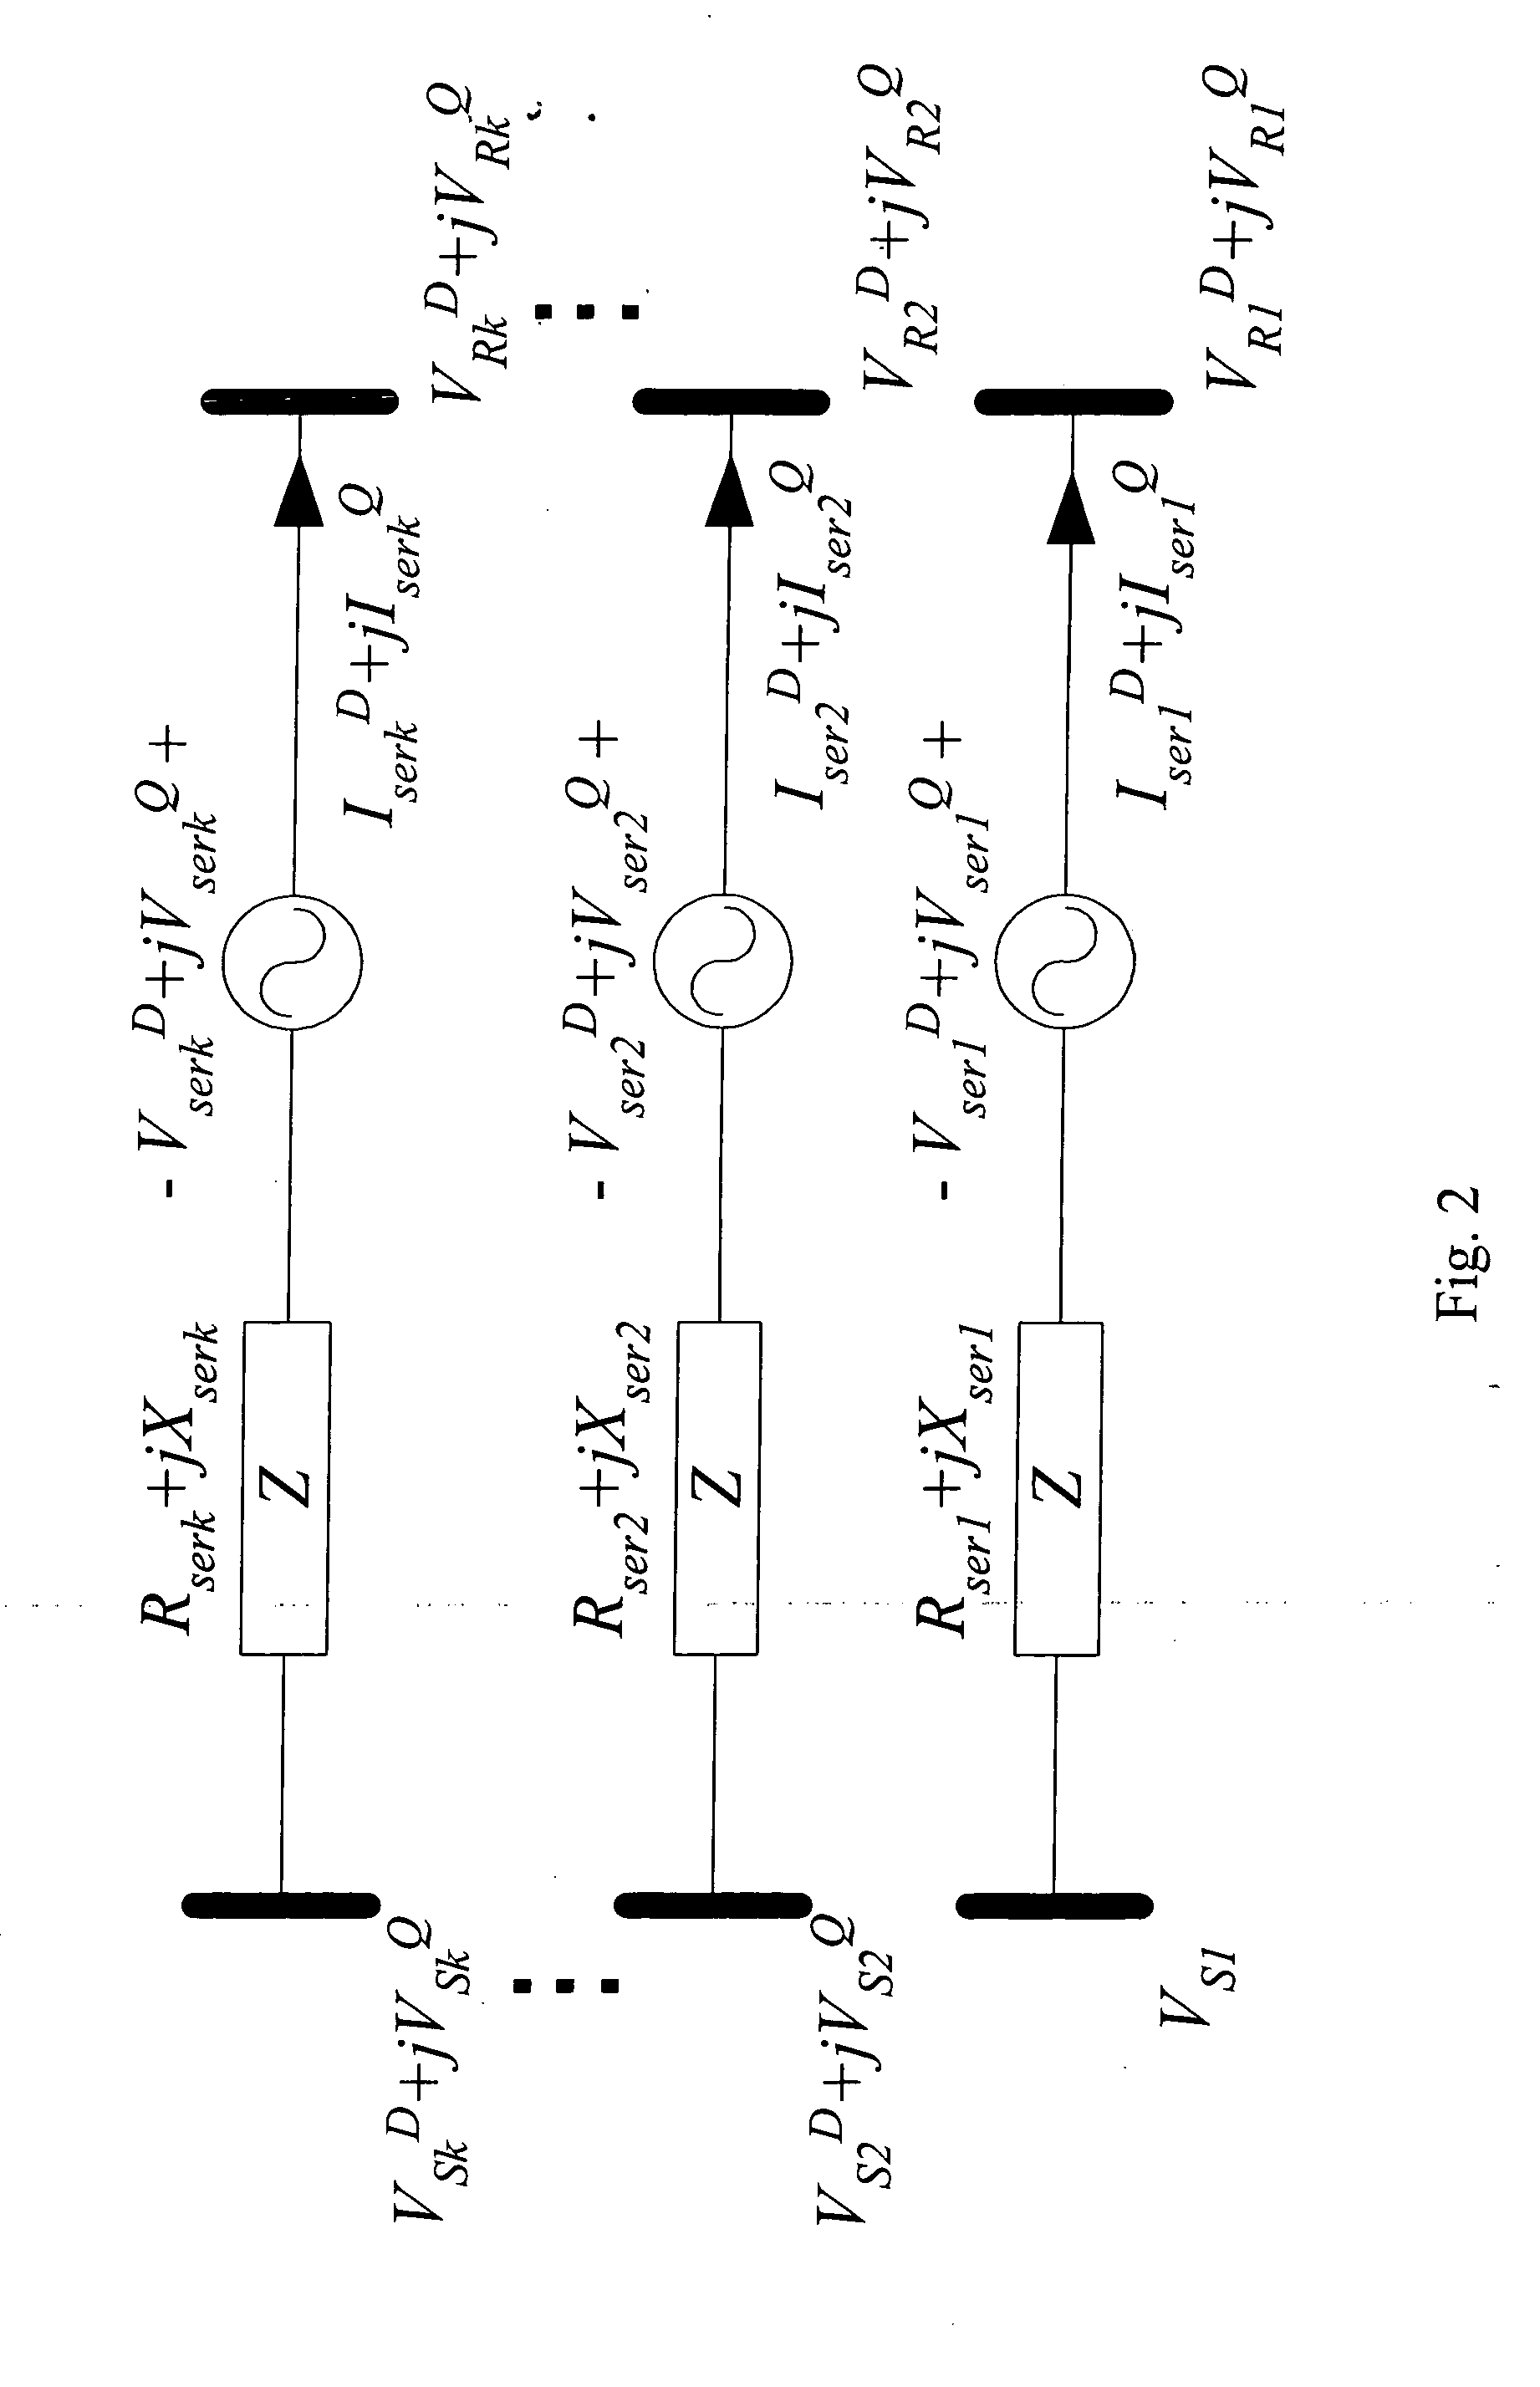 Method for Calculating Power Flow Solution of a Power Transmission Network that Includes Interline Power Flow Controller (IPFC)